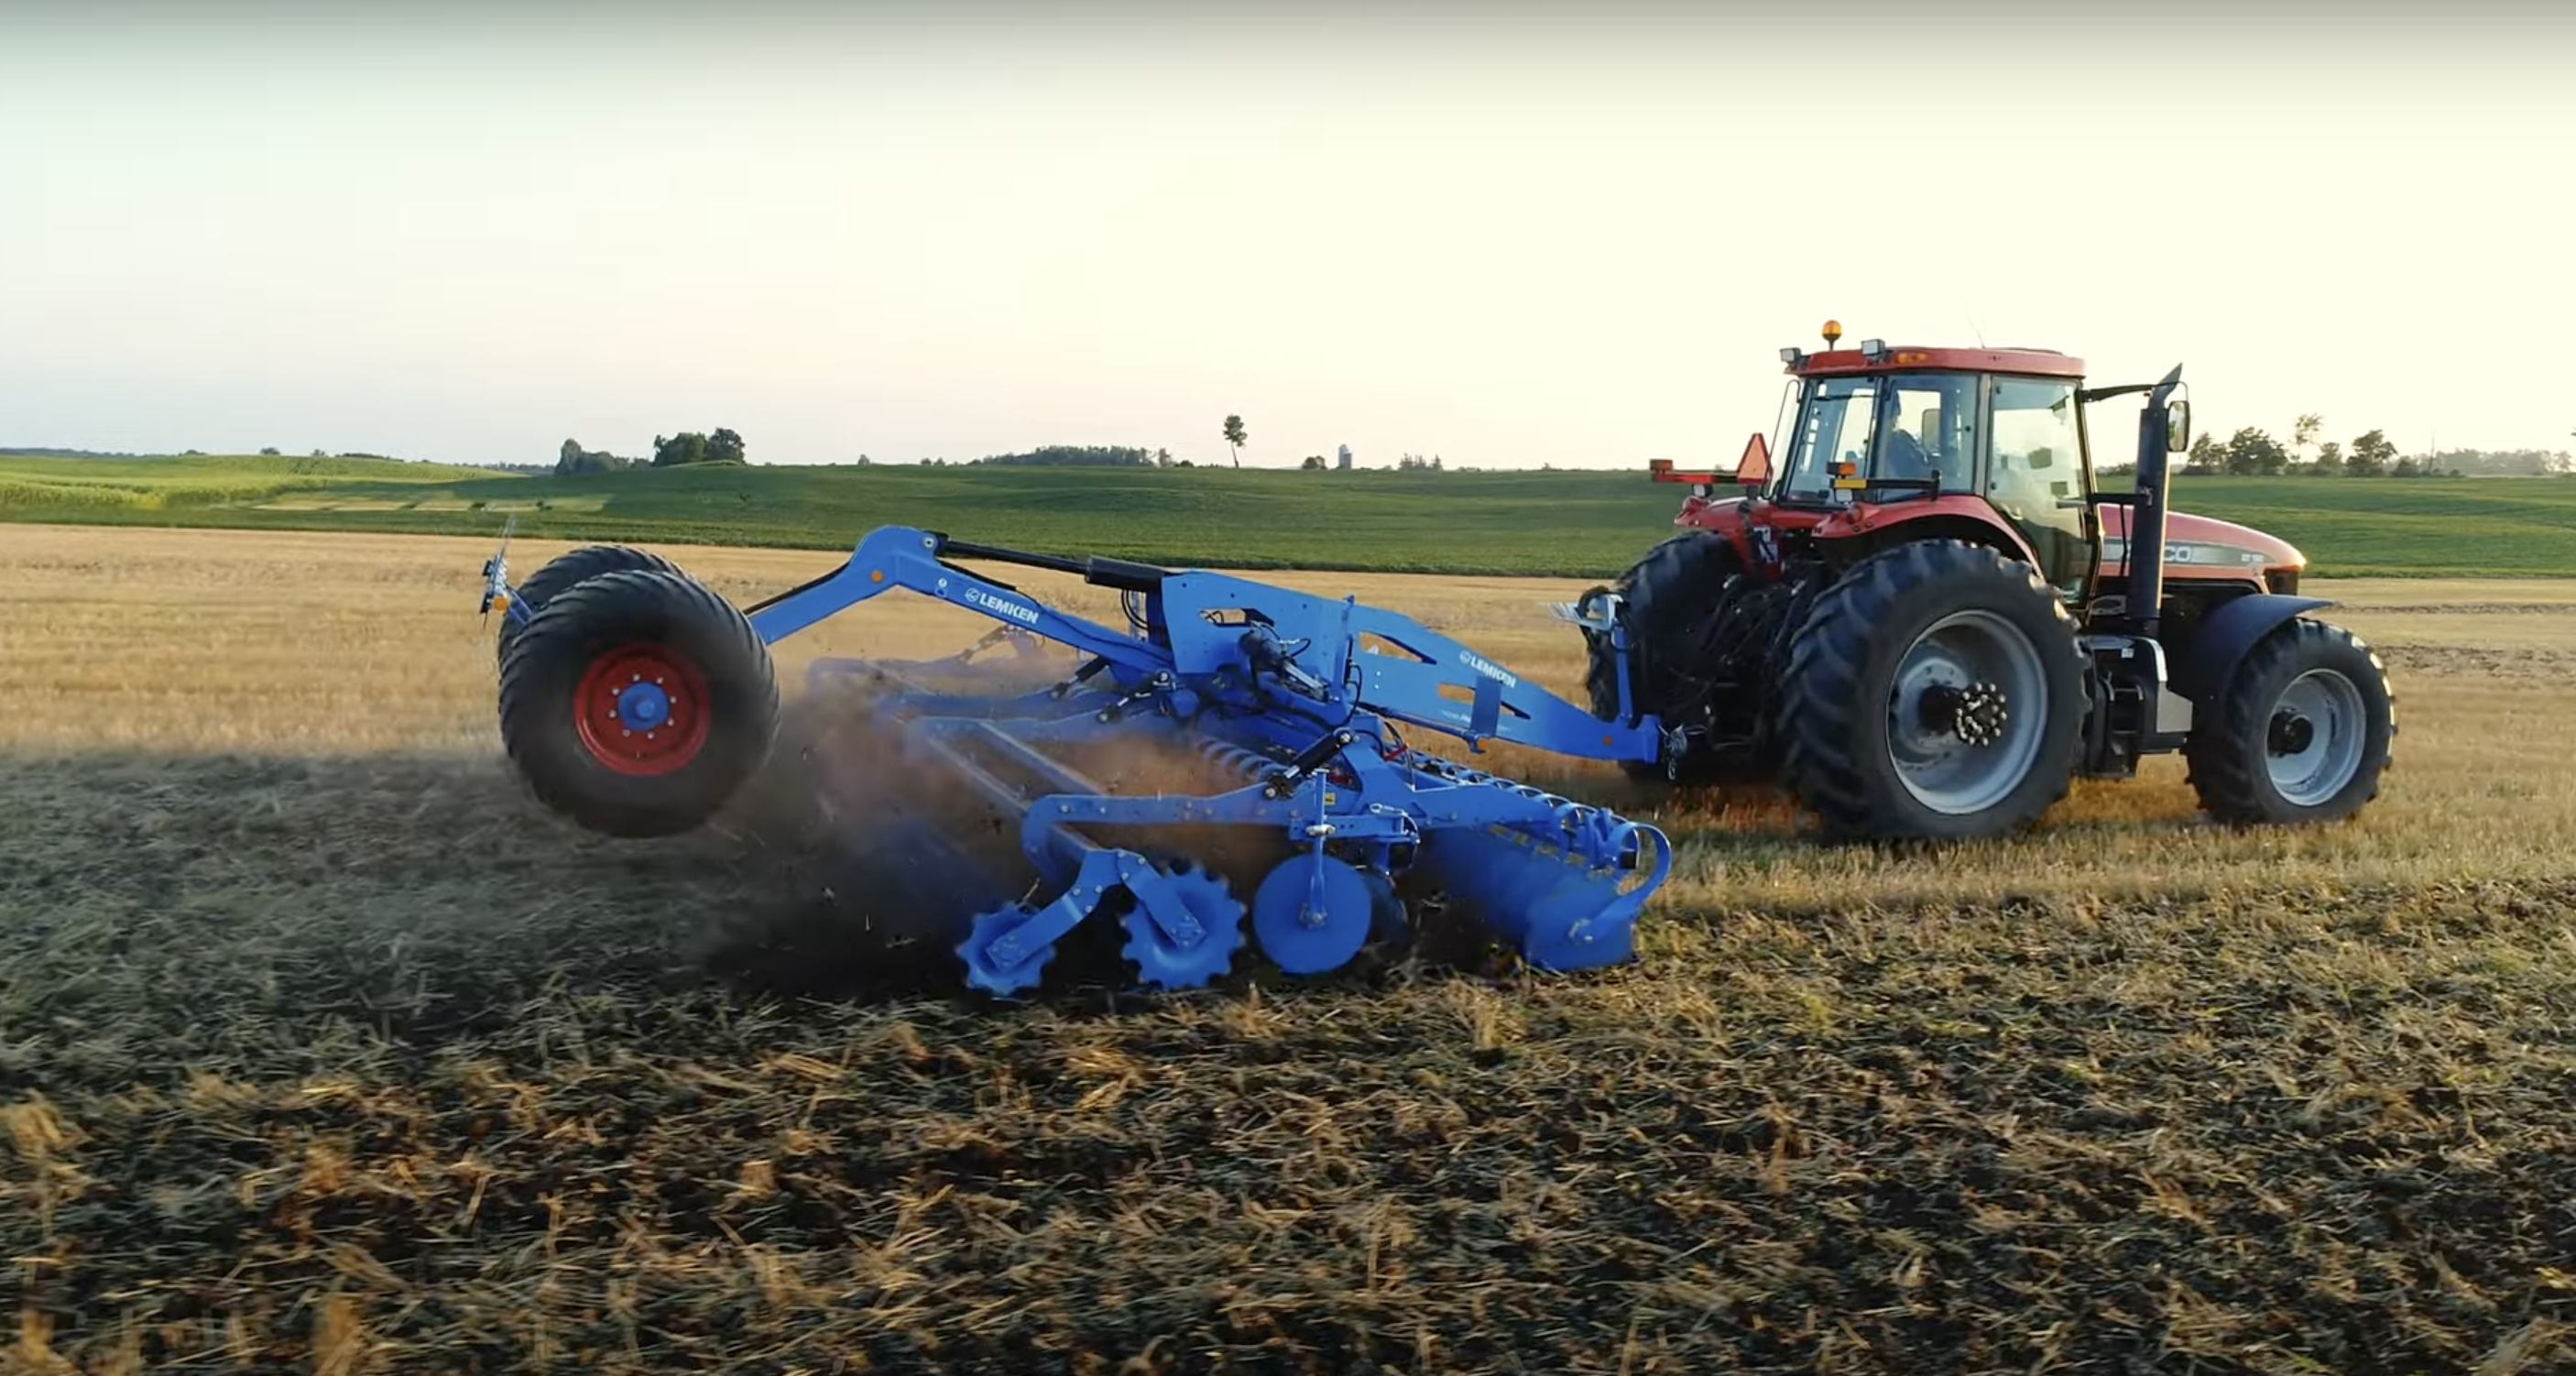 Cultivator Karat 9 - Working width from 3 m to 7 m